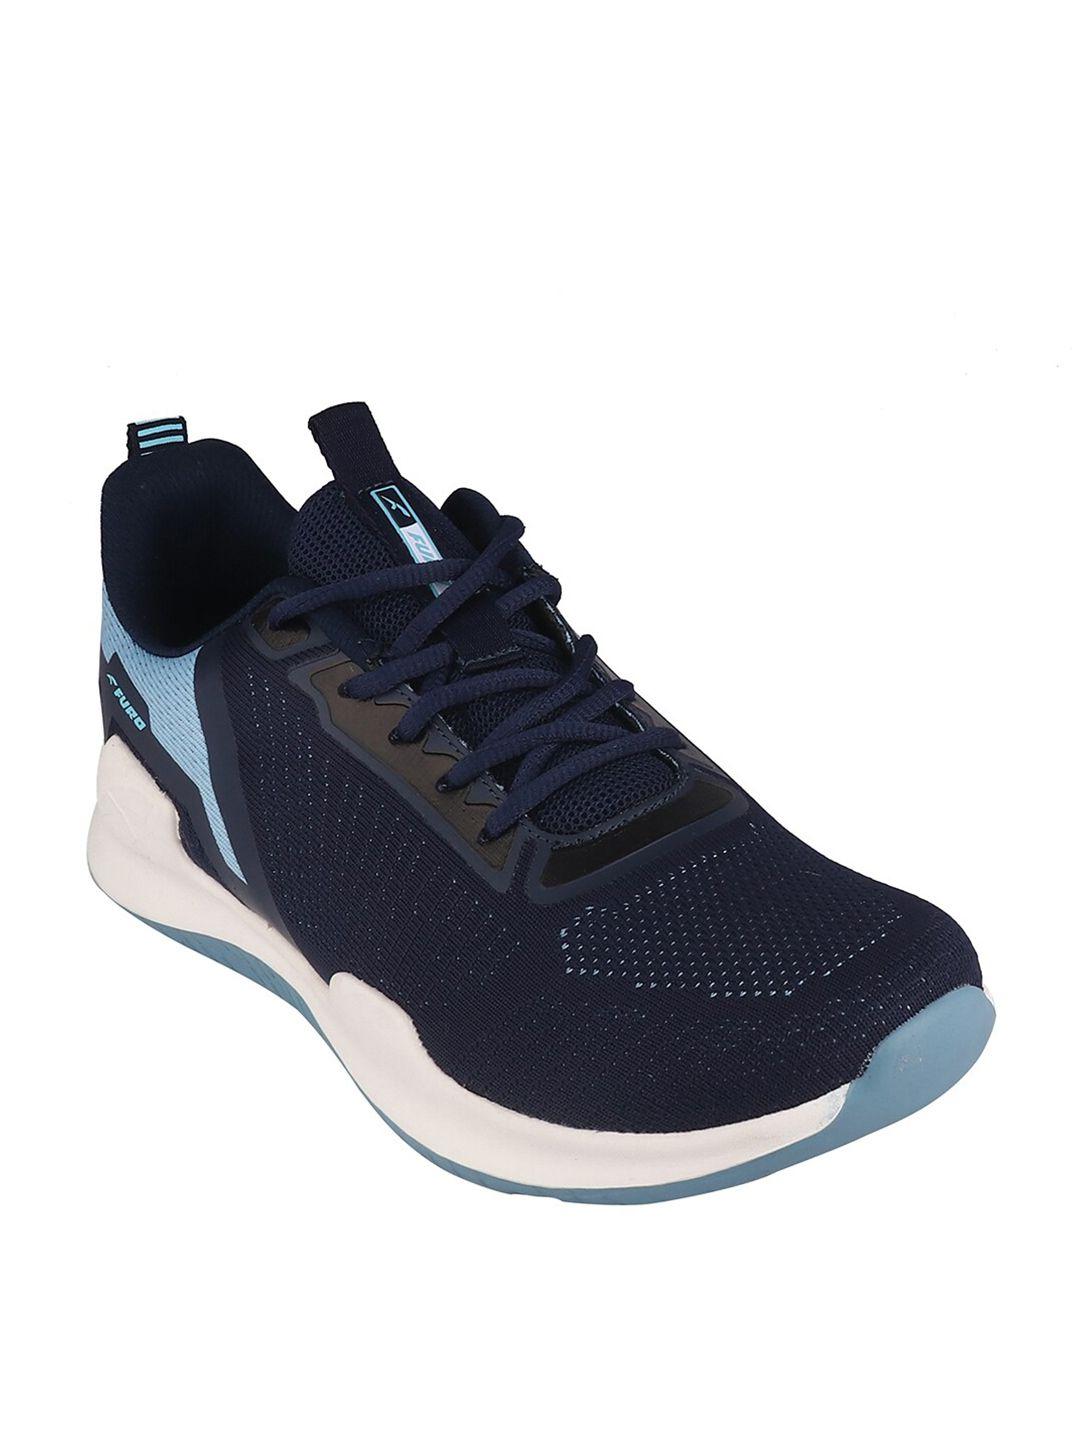 furo by red chief men mesh walking non-marking sports shoes